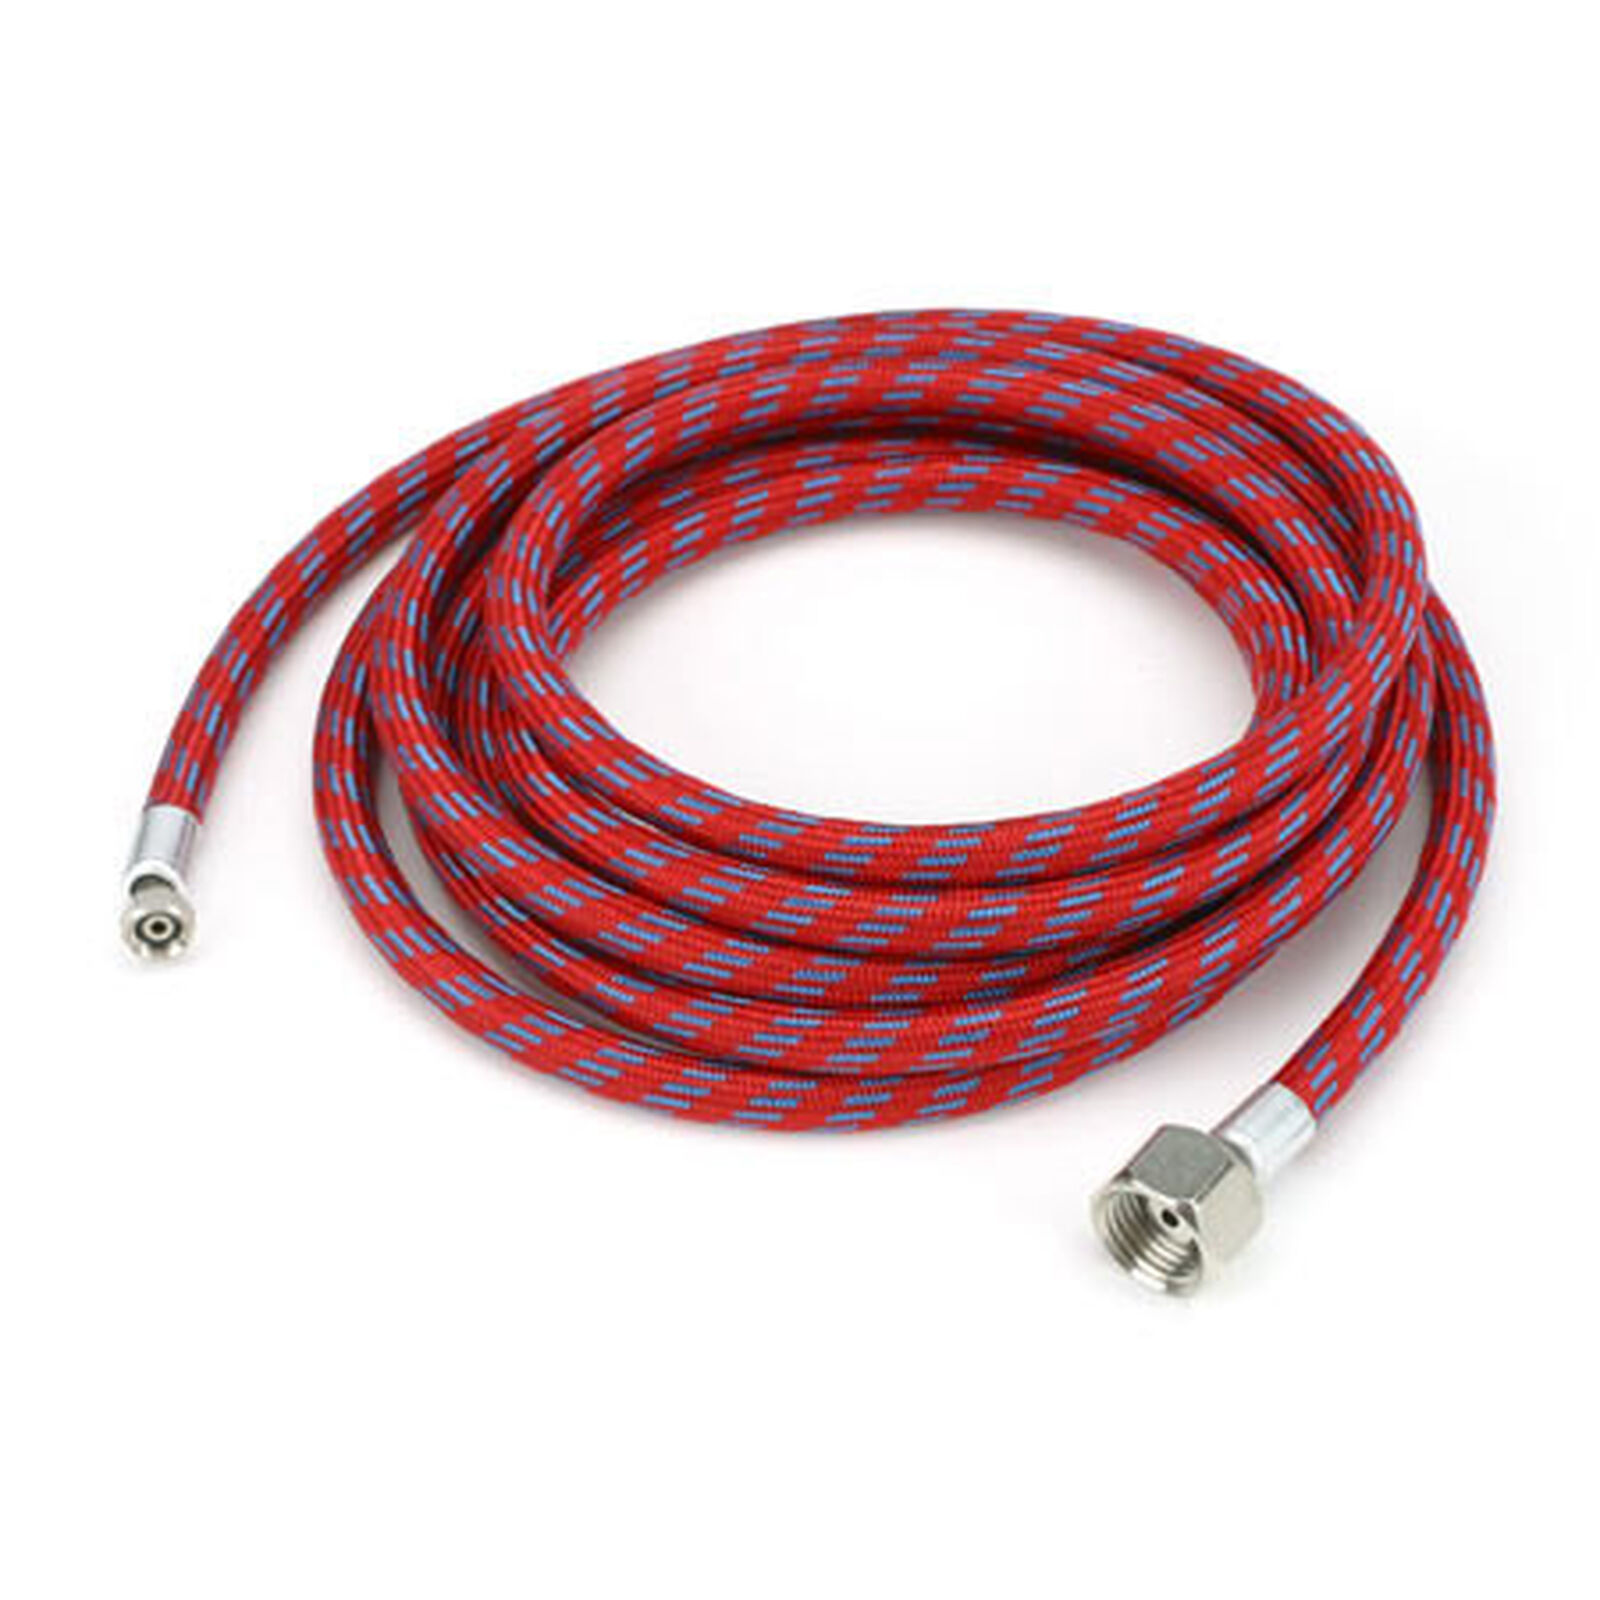 Braided Air Hose with Coupling, 8'